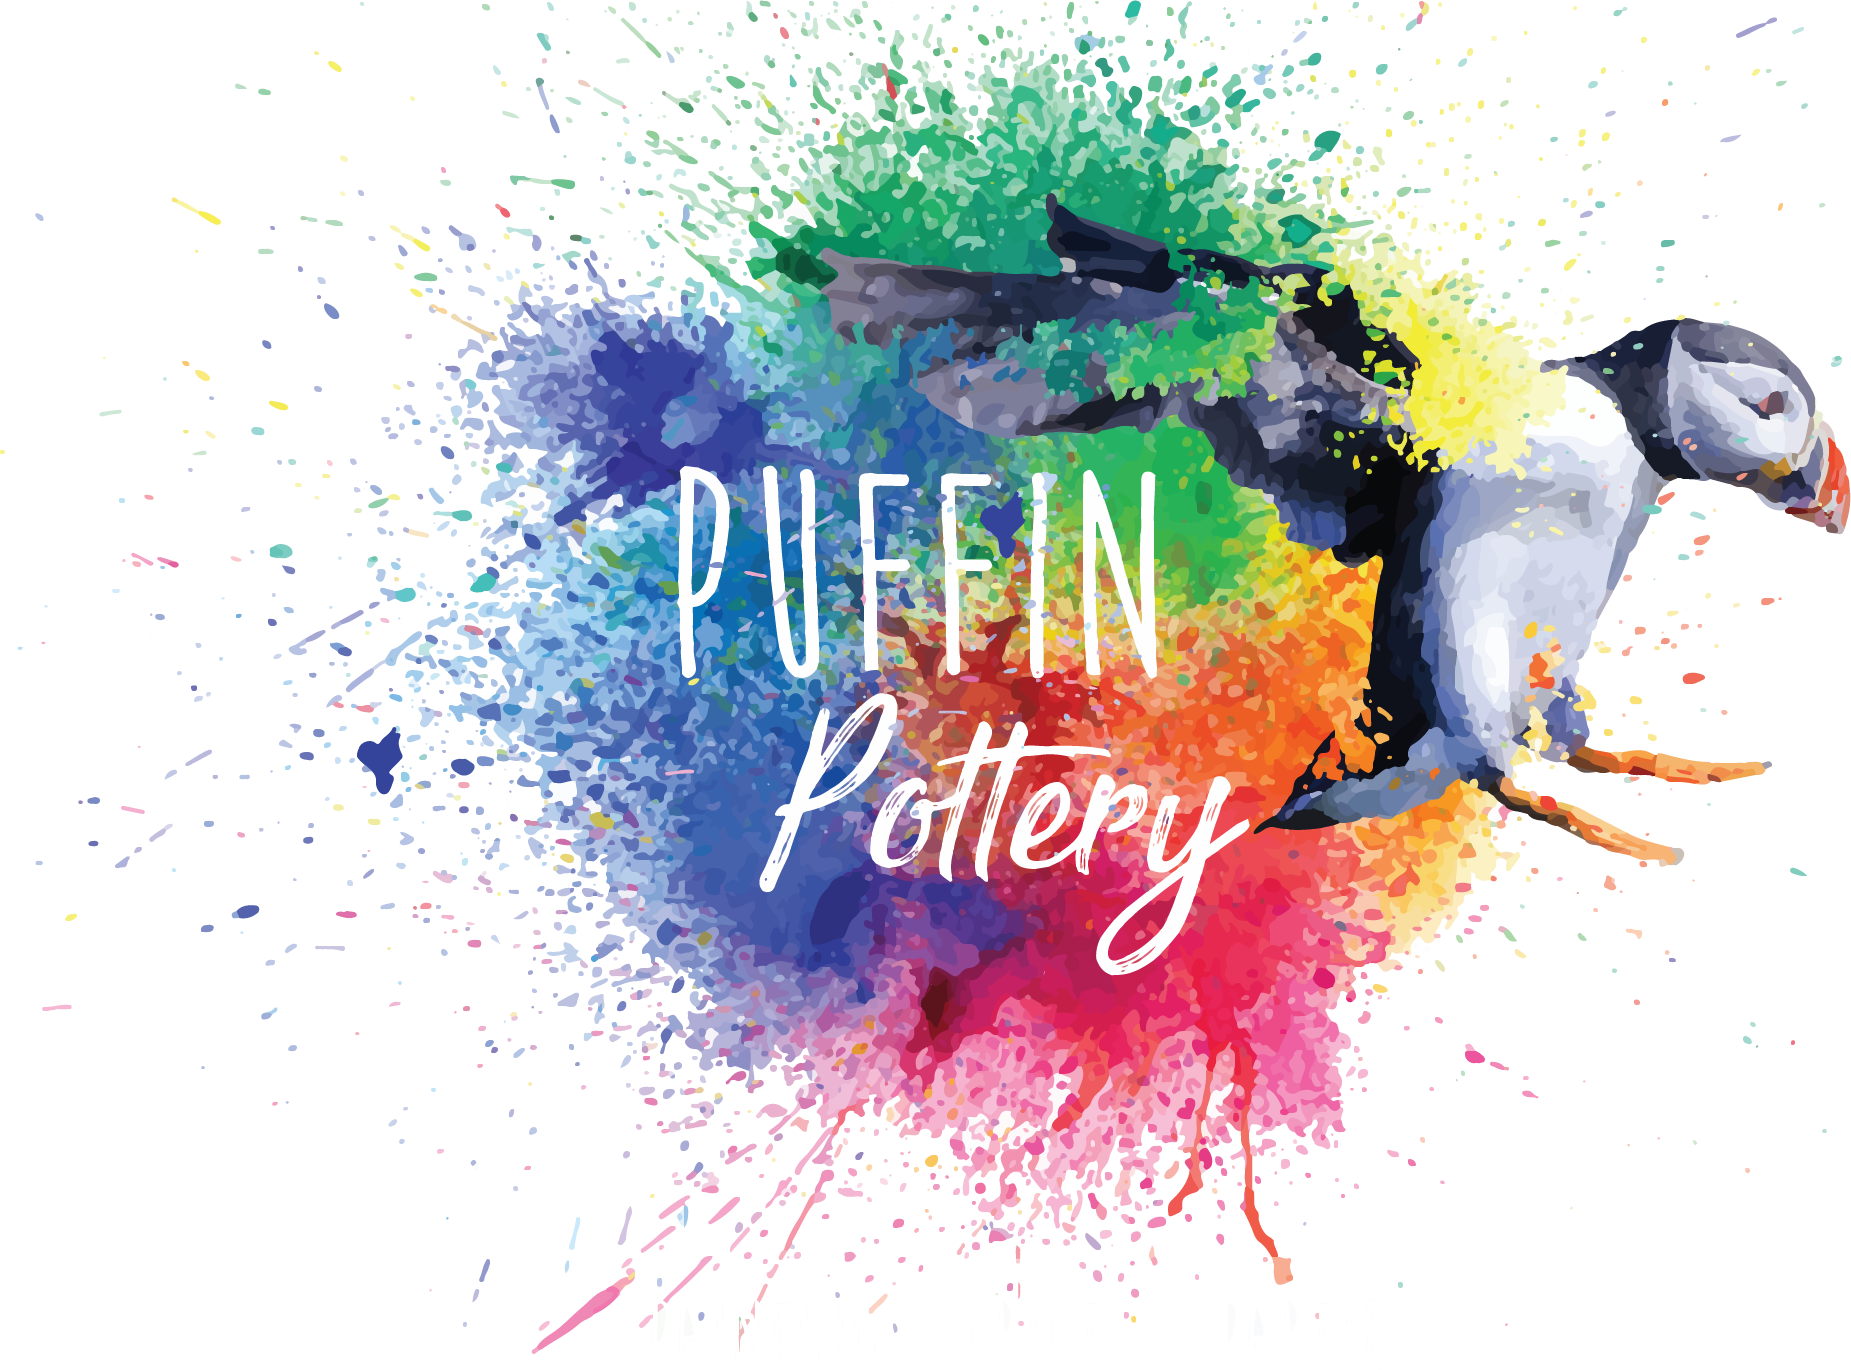 Puffin Pottery logo